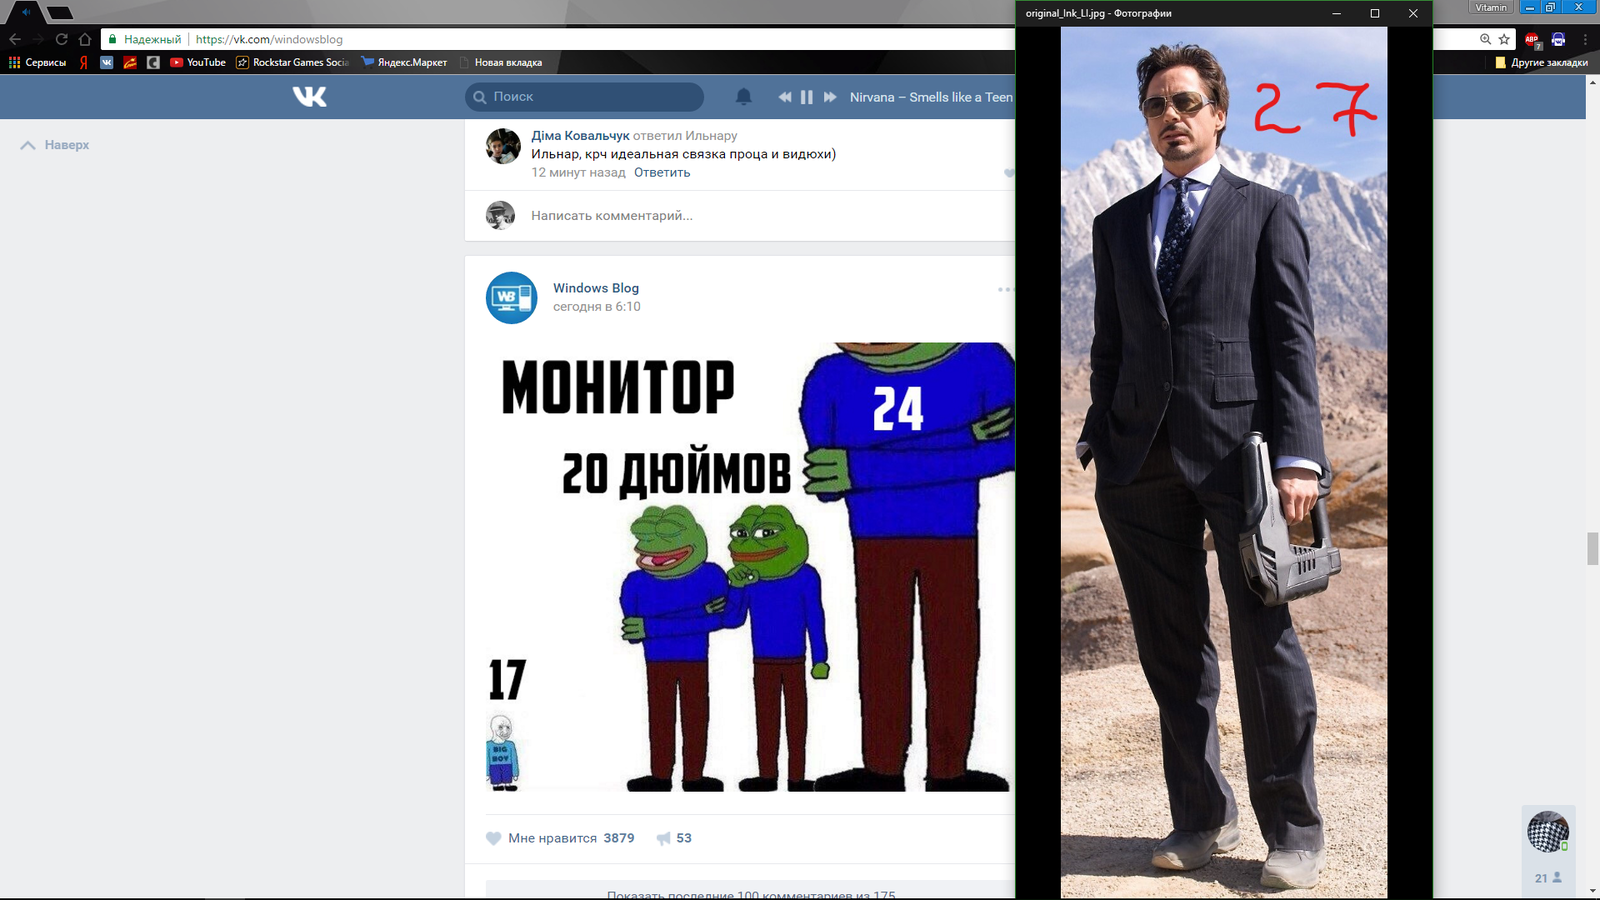 Challenge accepted? Who has the larger diagonal? - Монитор, Diagonal, Pepe